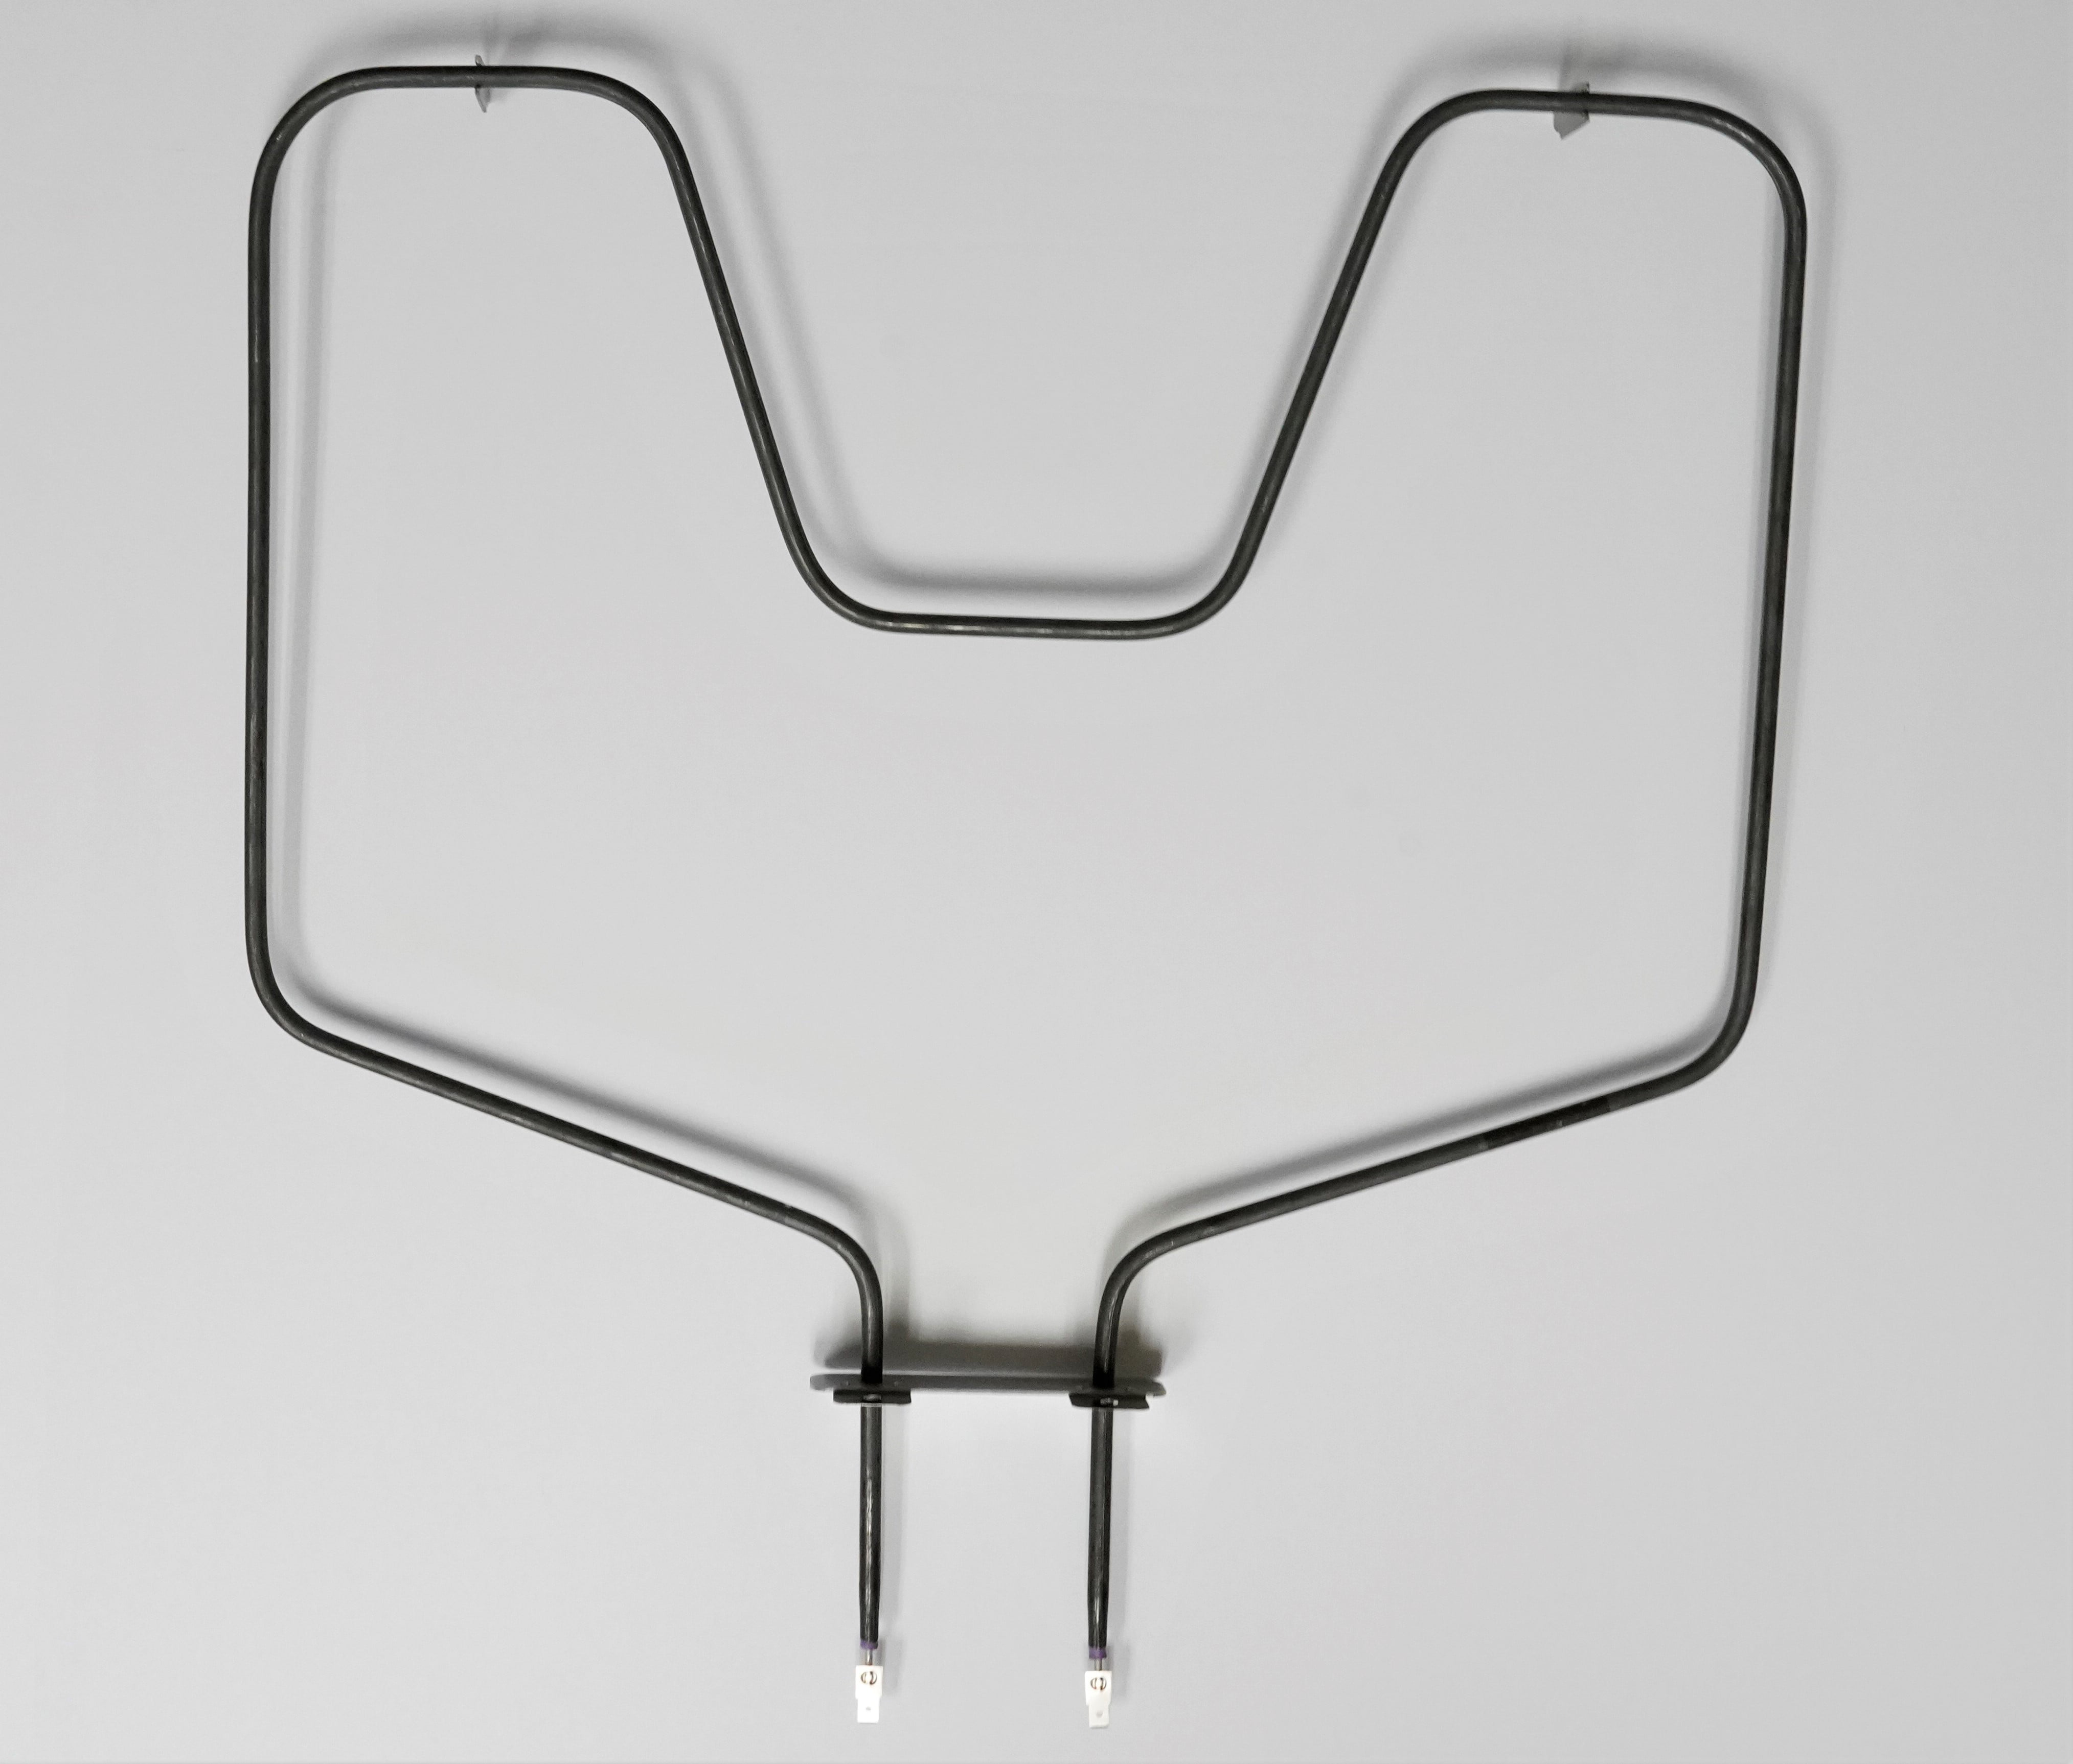 OEM CH44X10016 Supco Wall Oven Bake Element 